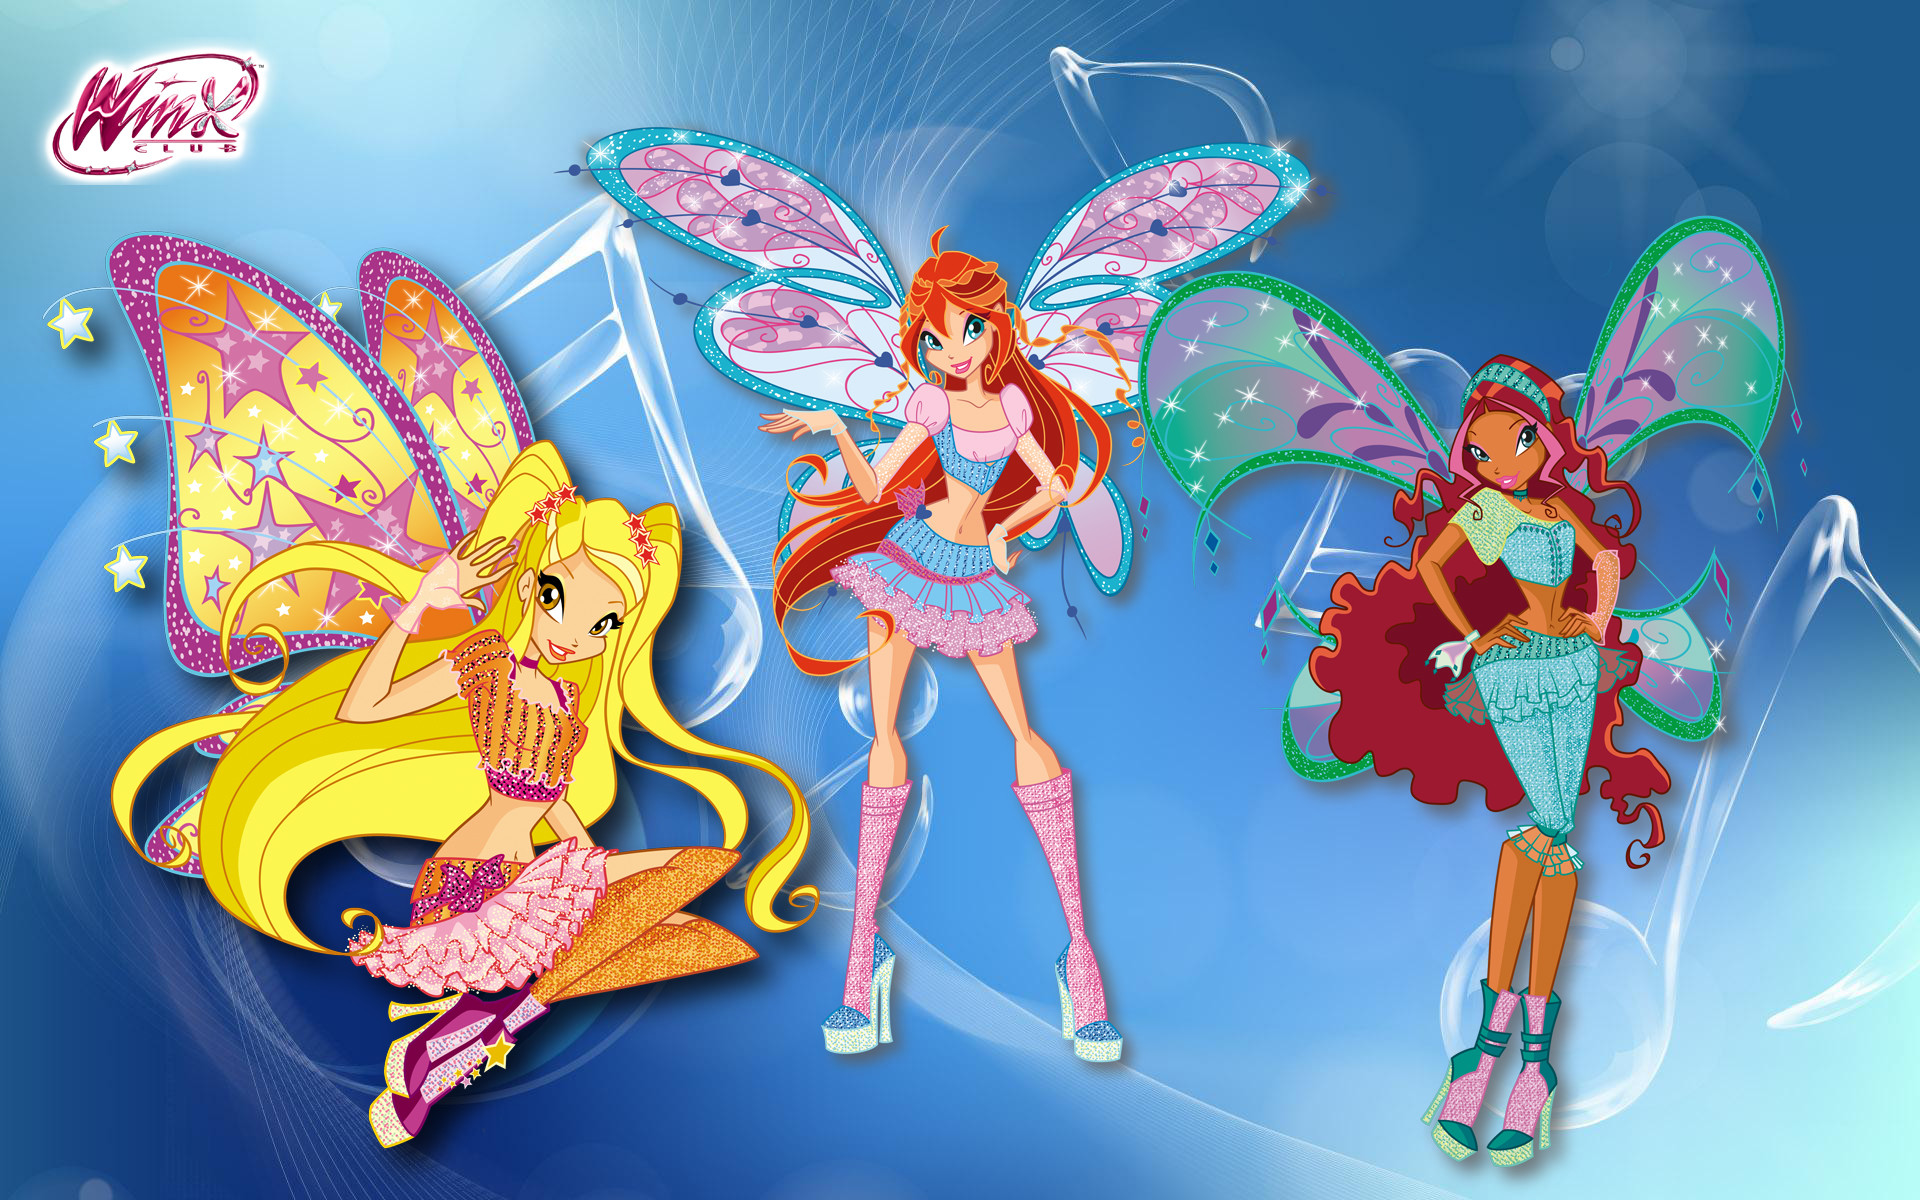 1920x1200 Winx Club Wide Wallpapers